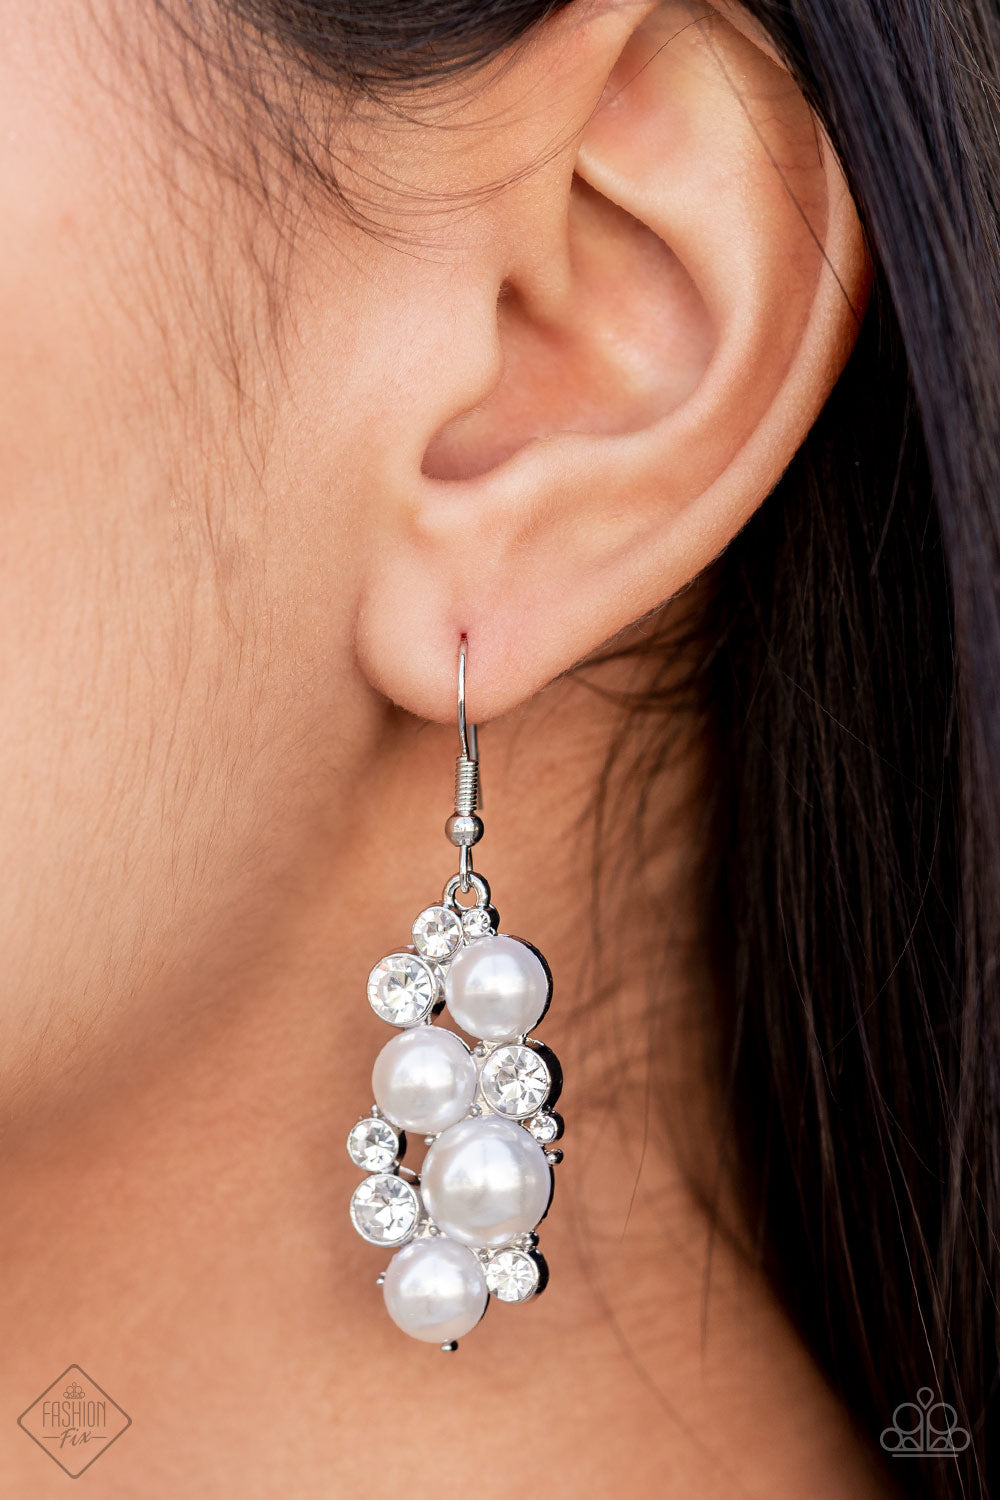 Halo Akoya White Pearl Earrings in White Gold with Diamonds - 8-8.5mm –  Maui Divers Jewelry